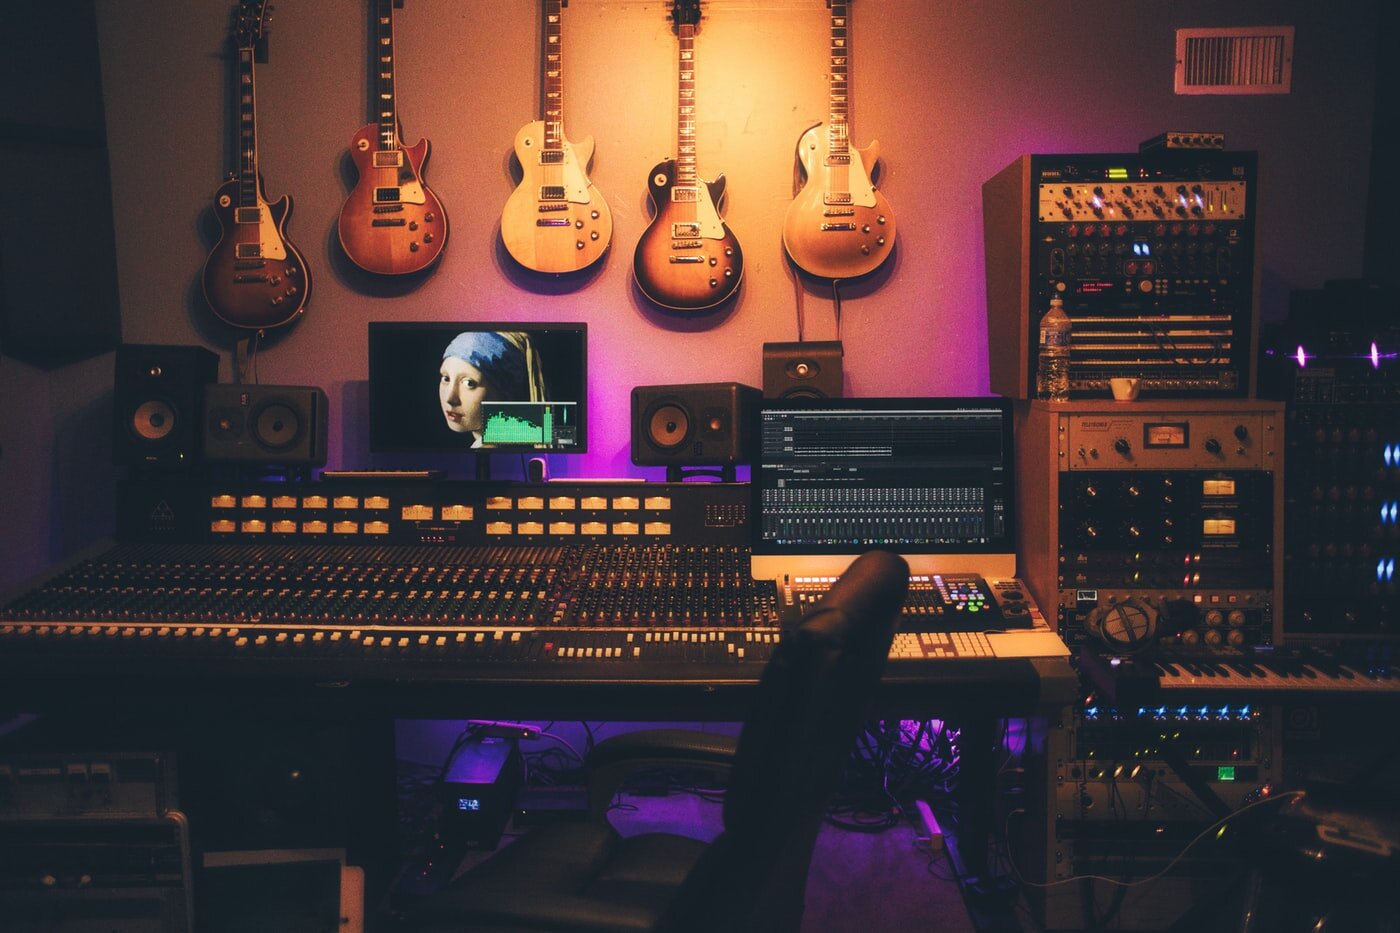 An example of what our recording studio &amp; equipment could look like